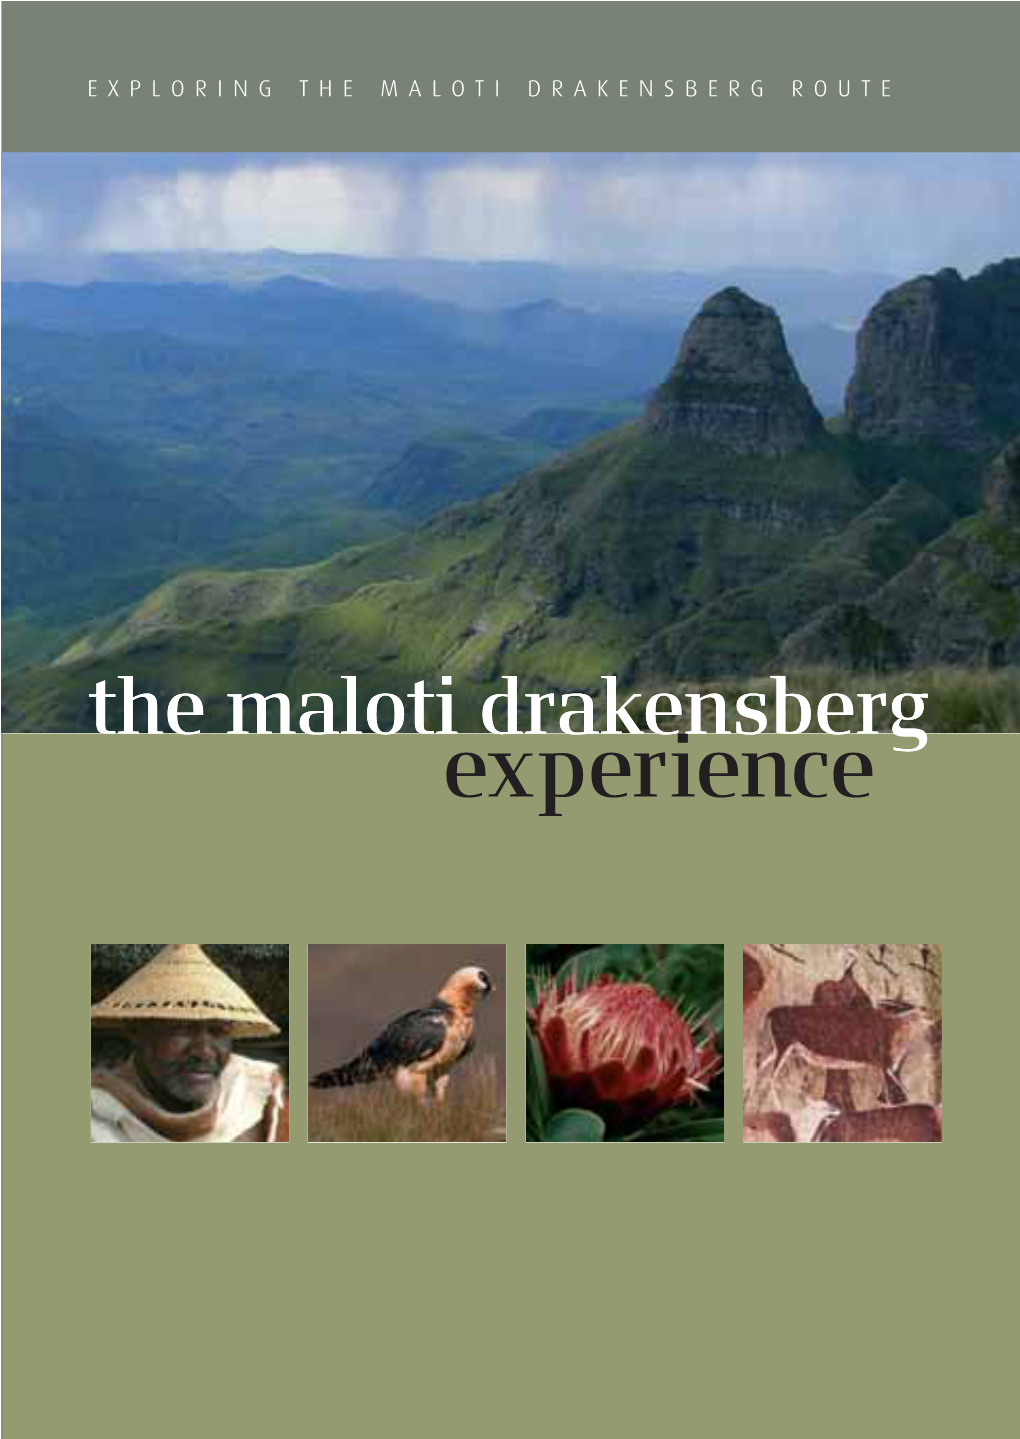 The Maloti Drakensberg Experience See Travel Map Inside This Flap❯❯❯